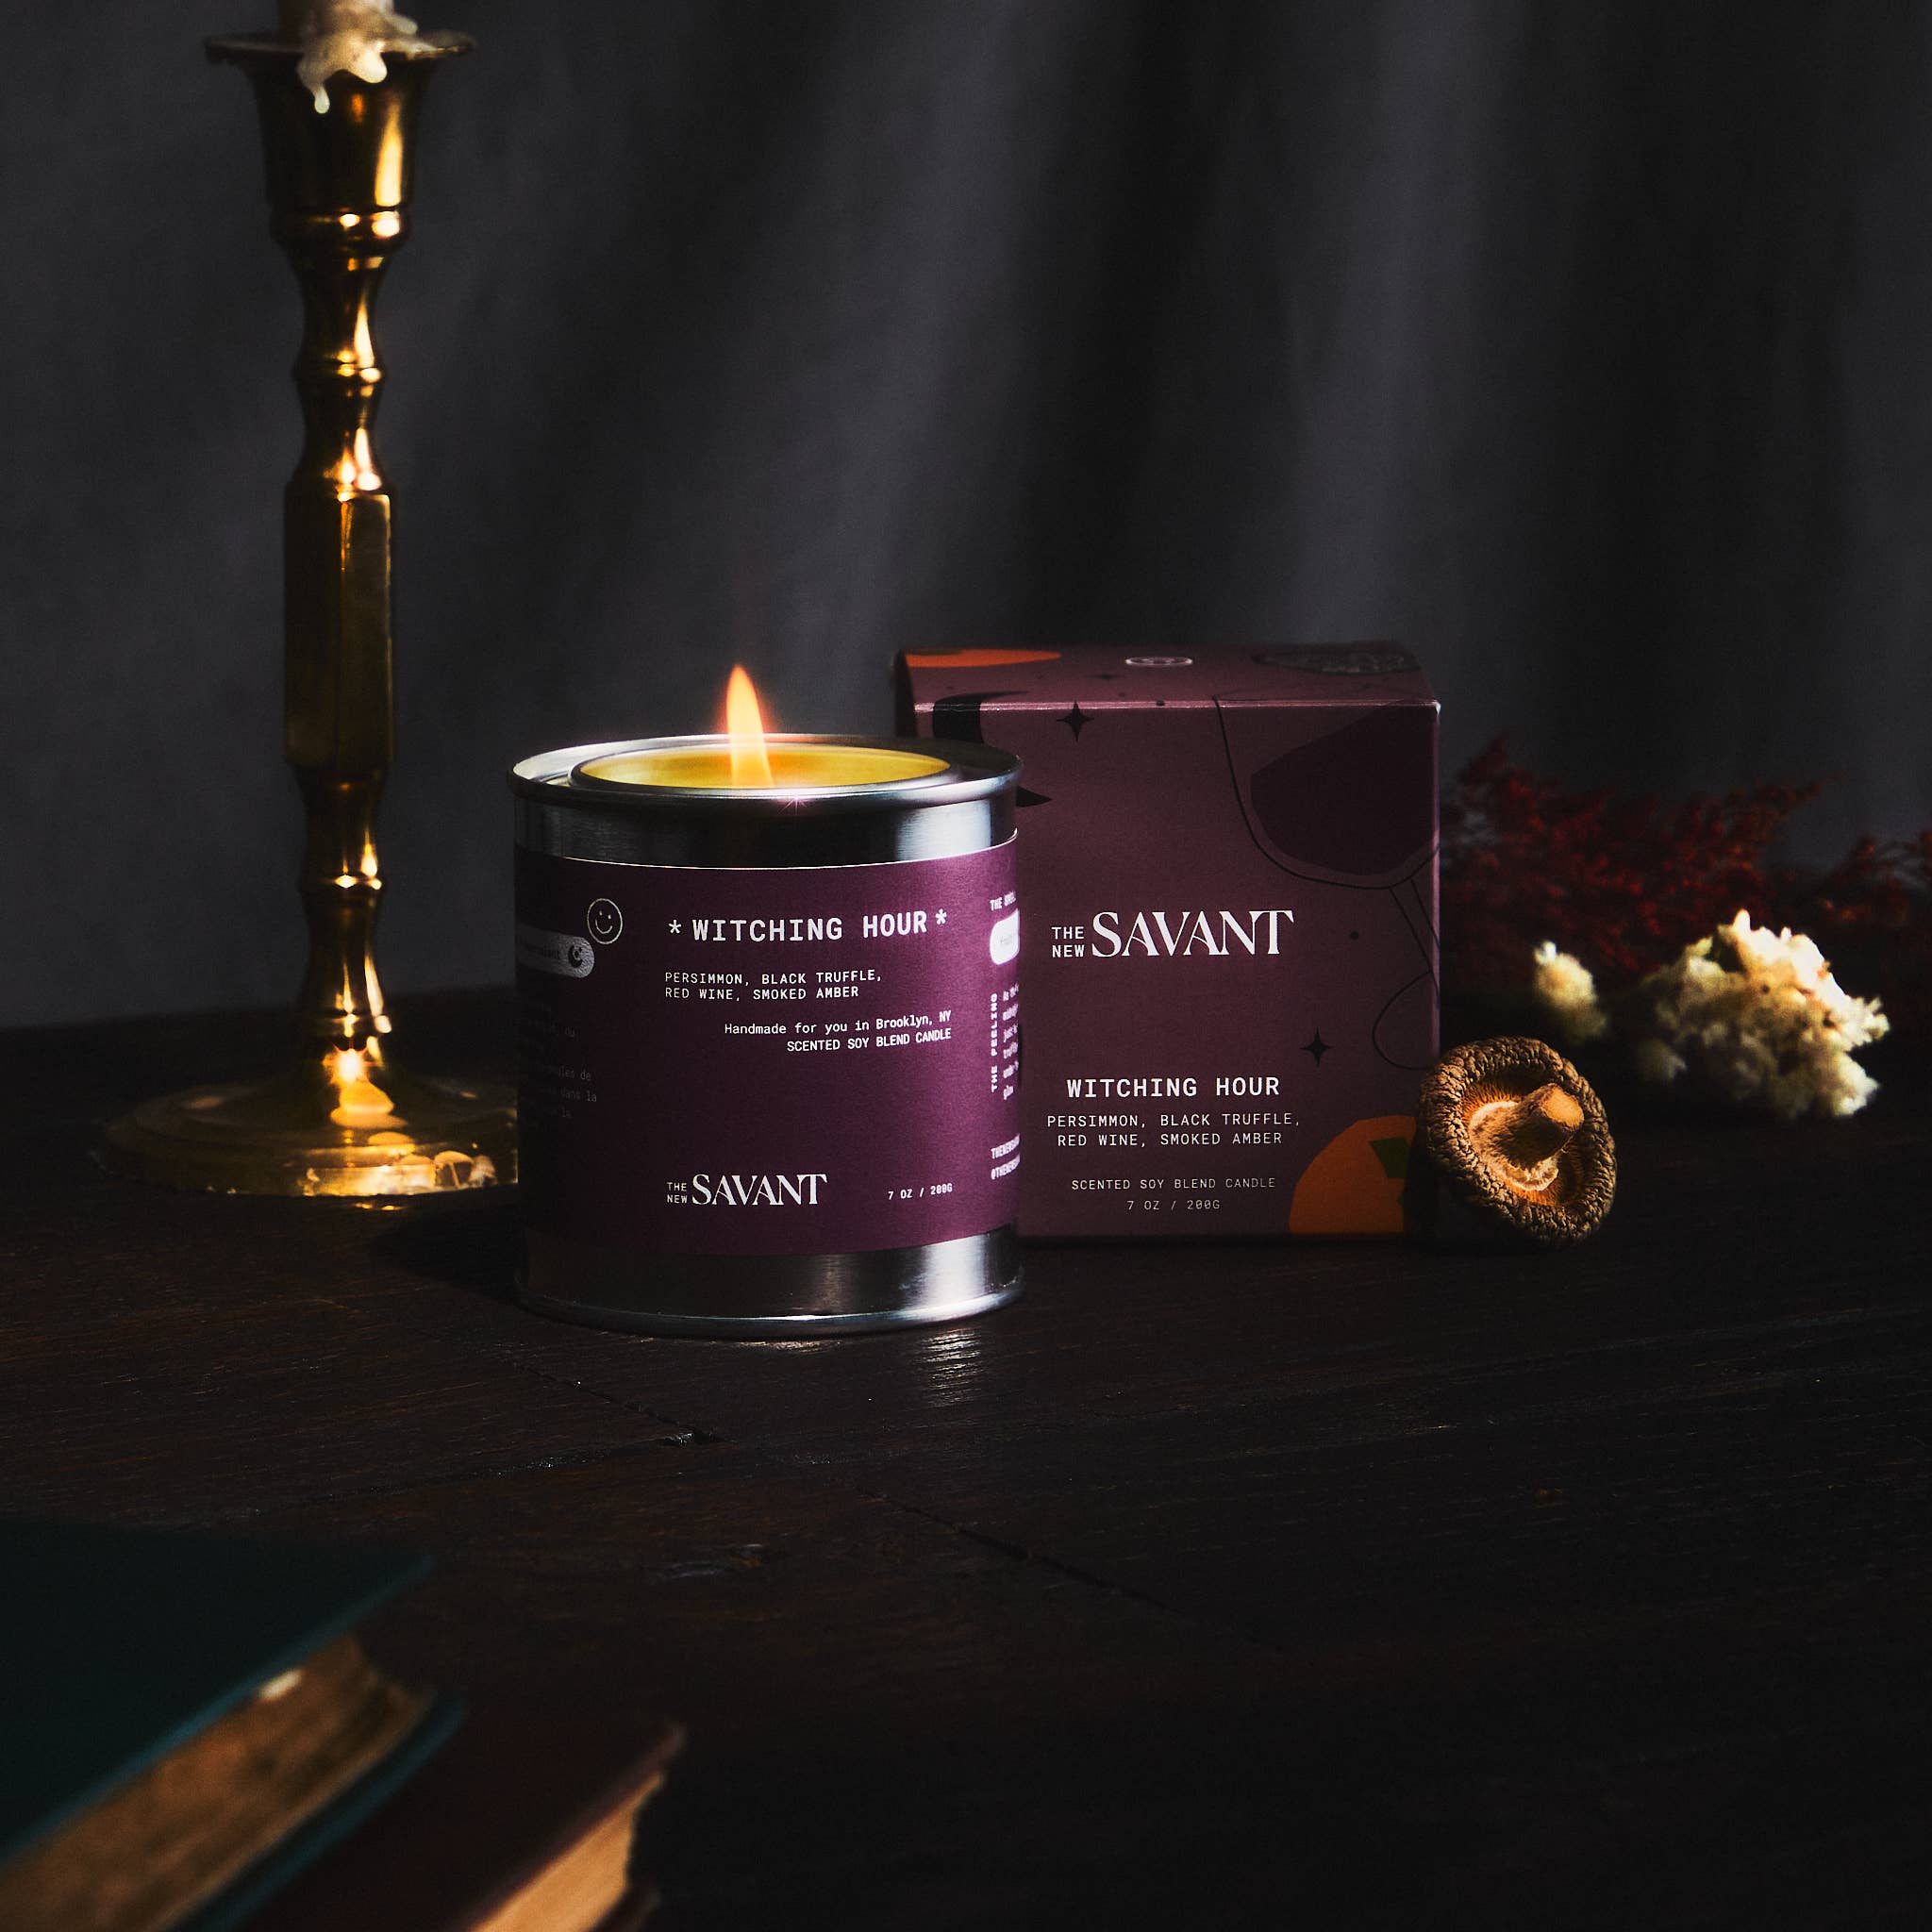 "Witching Hour" Candle - The New Savant